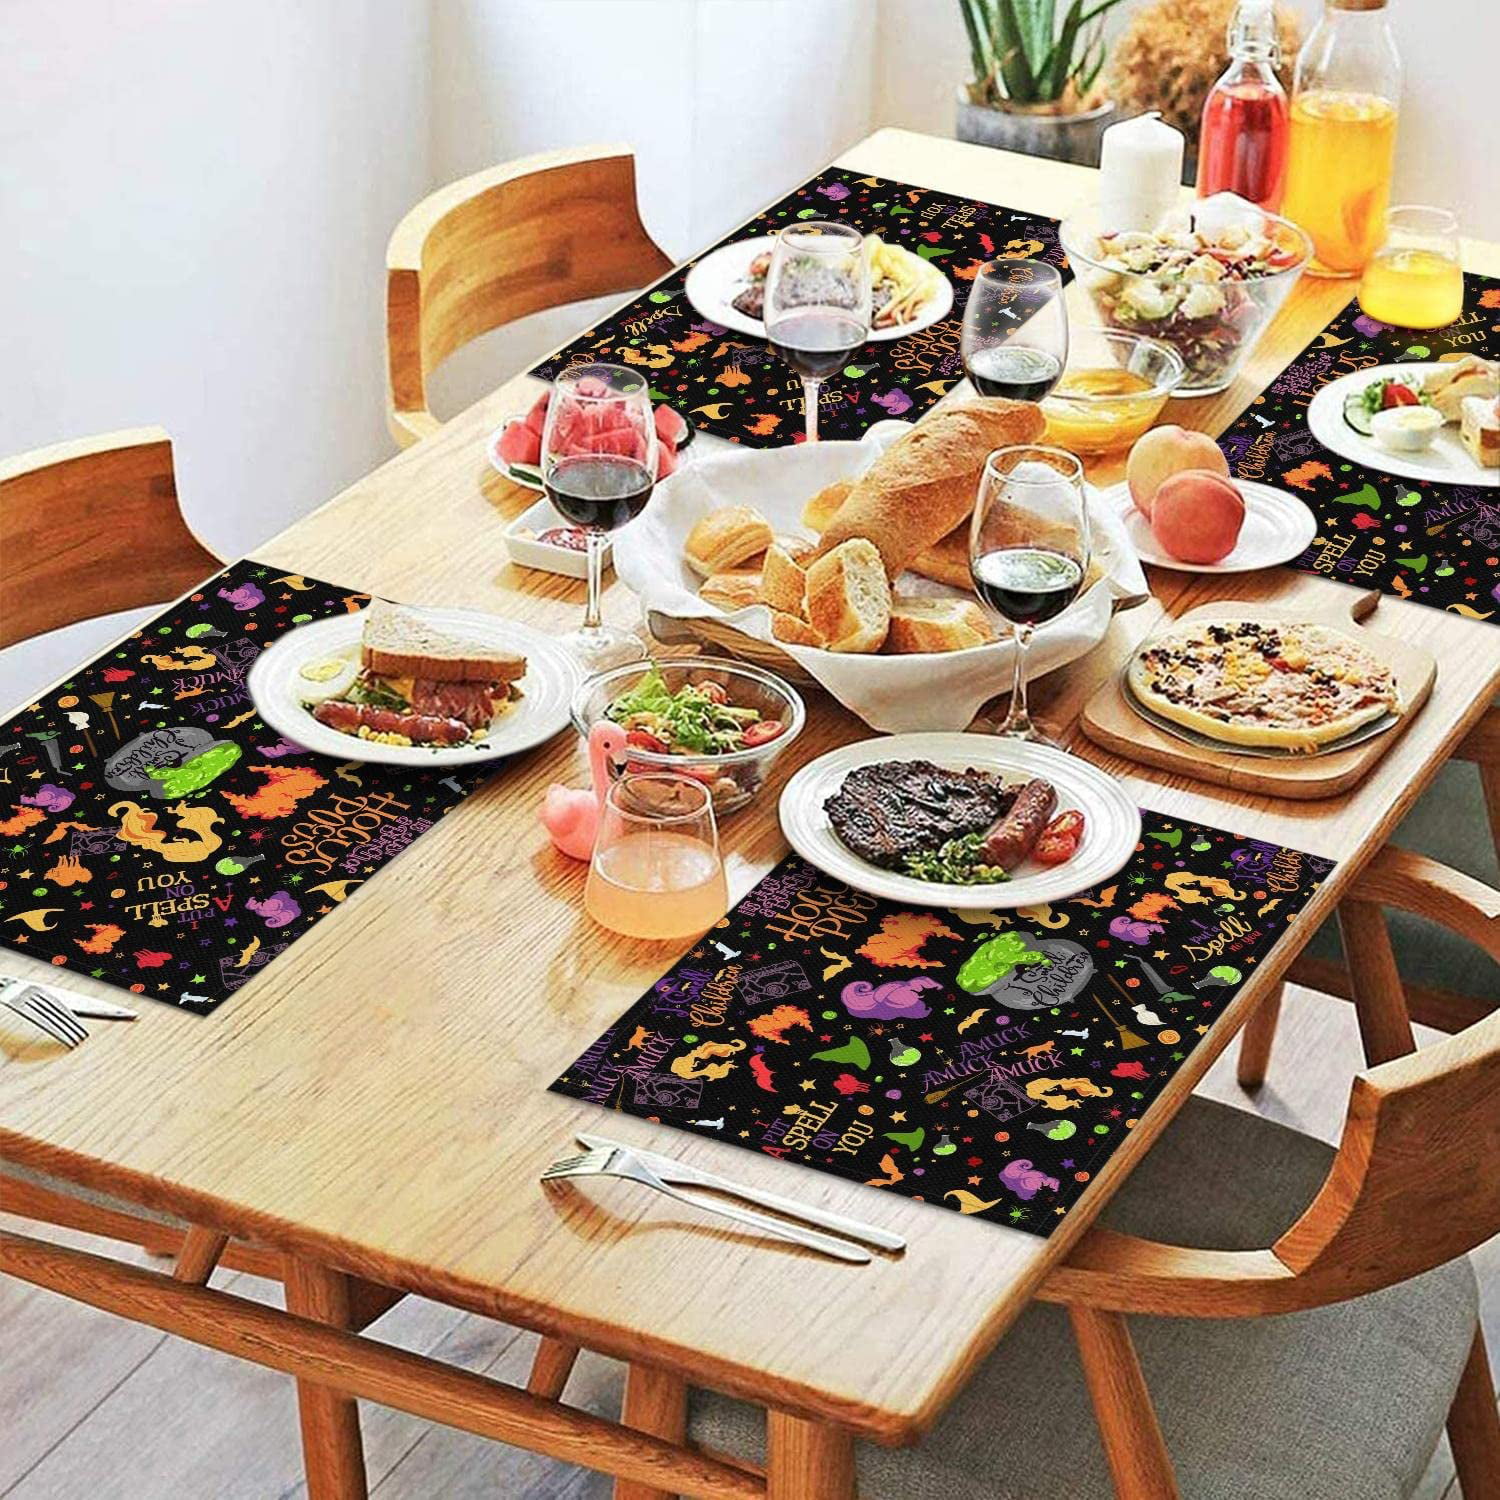 1pc 57x40cm Halloween Decorations Pumpkins and Witch Dish Towels Kitchen  Decor Gift Witches and Black Cats Table Dinner Supplies - AliExpress